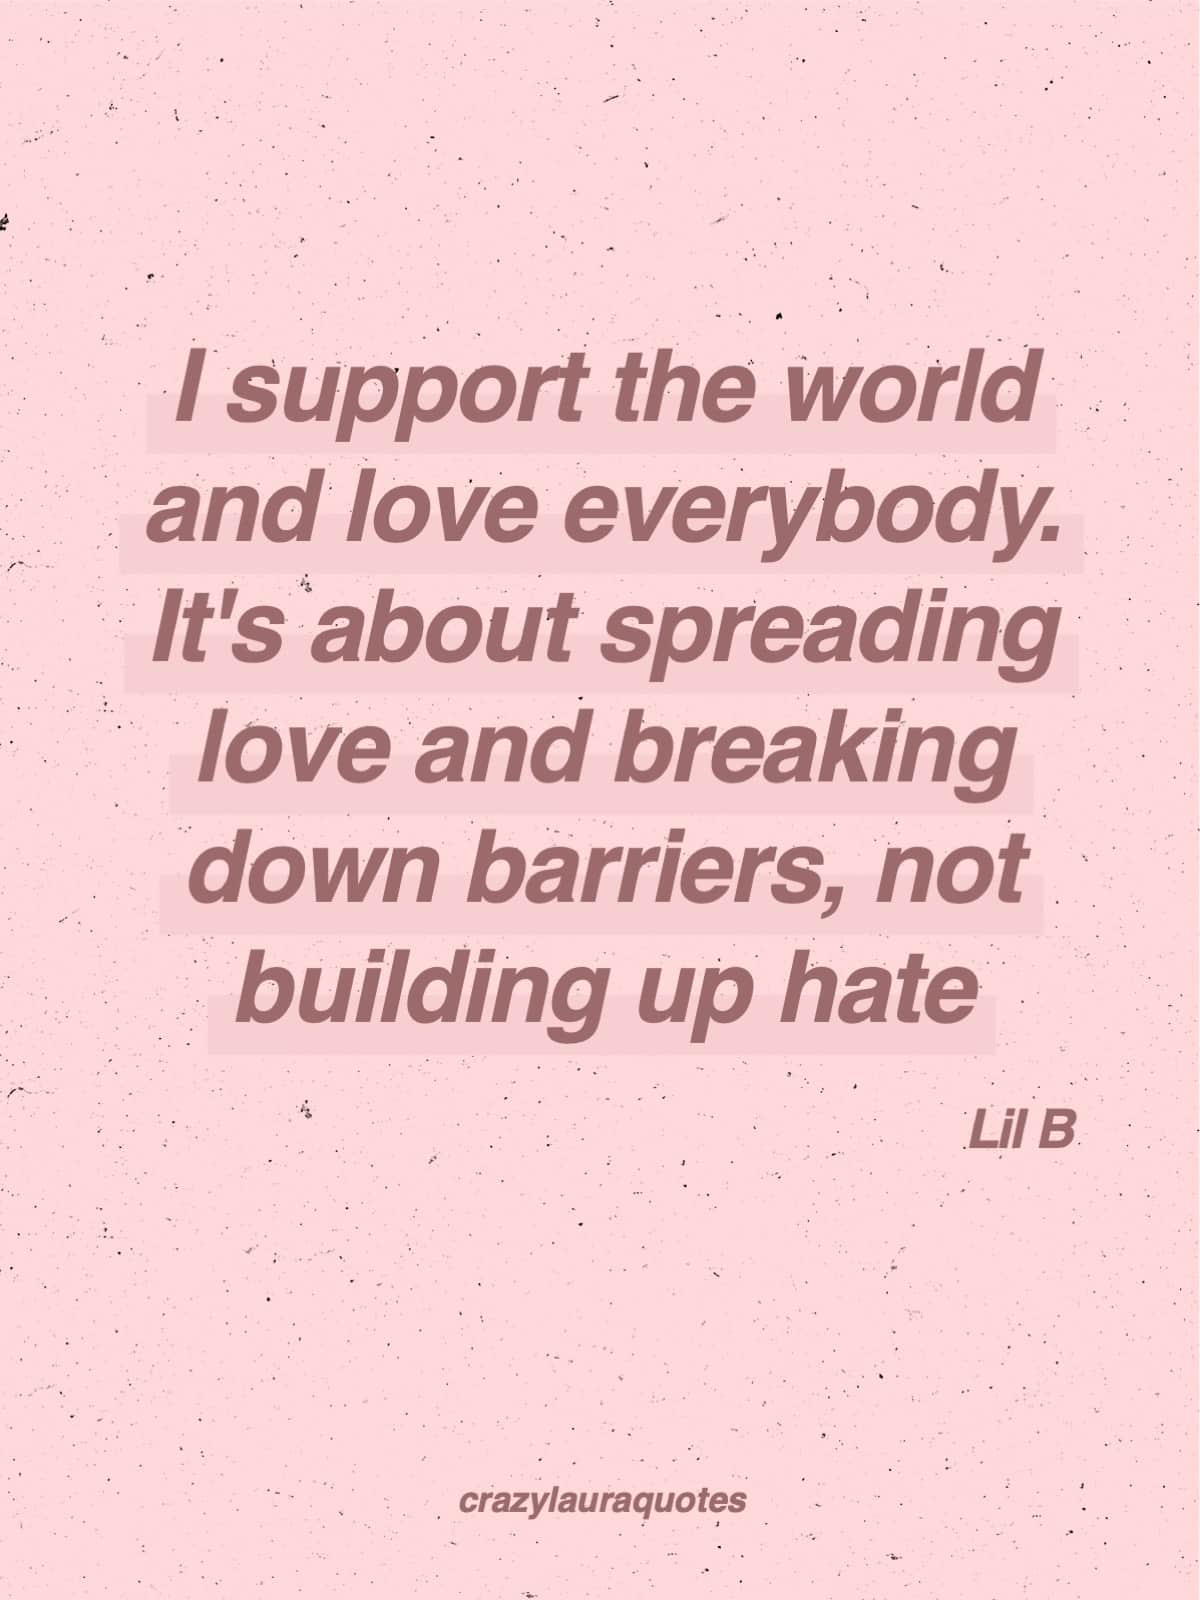 love everybody inspirational lil b quote